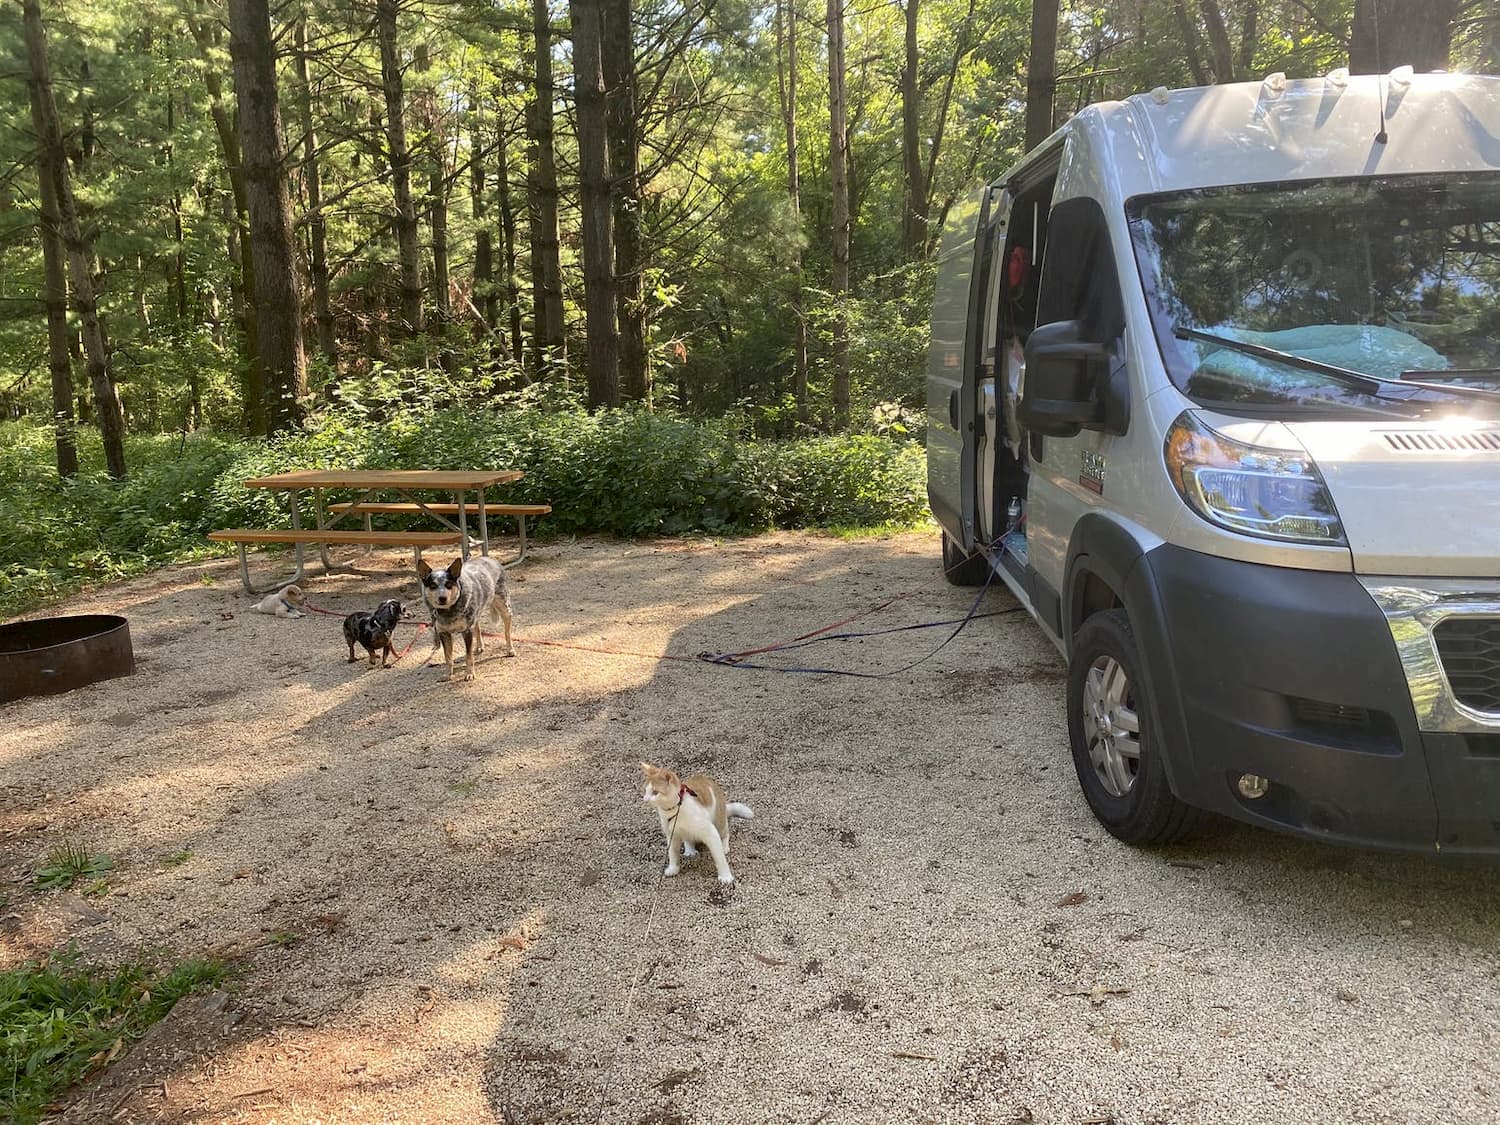 van parked at campsite, with dogs and picnic table